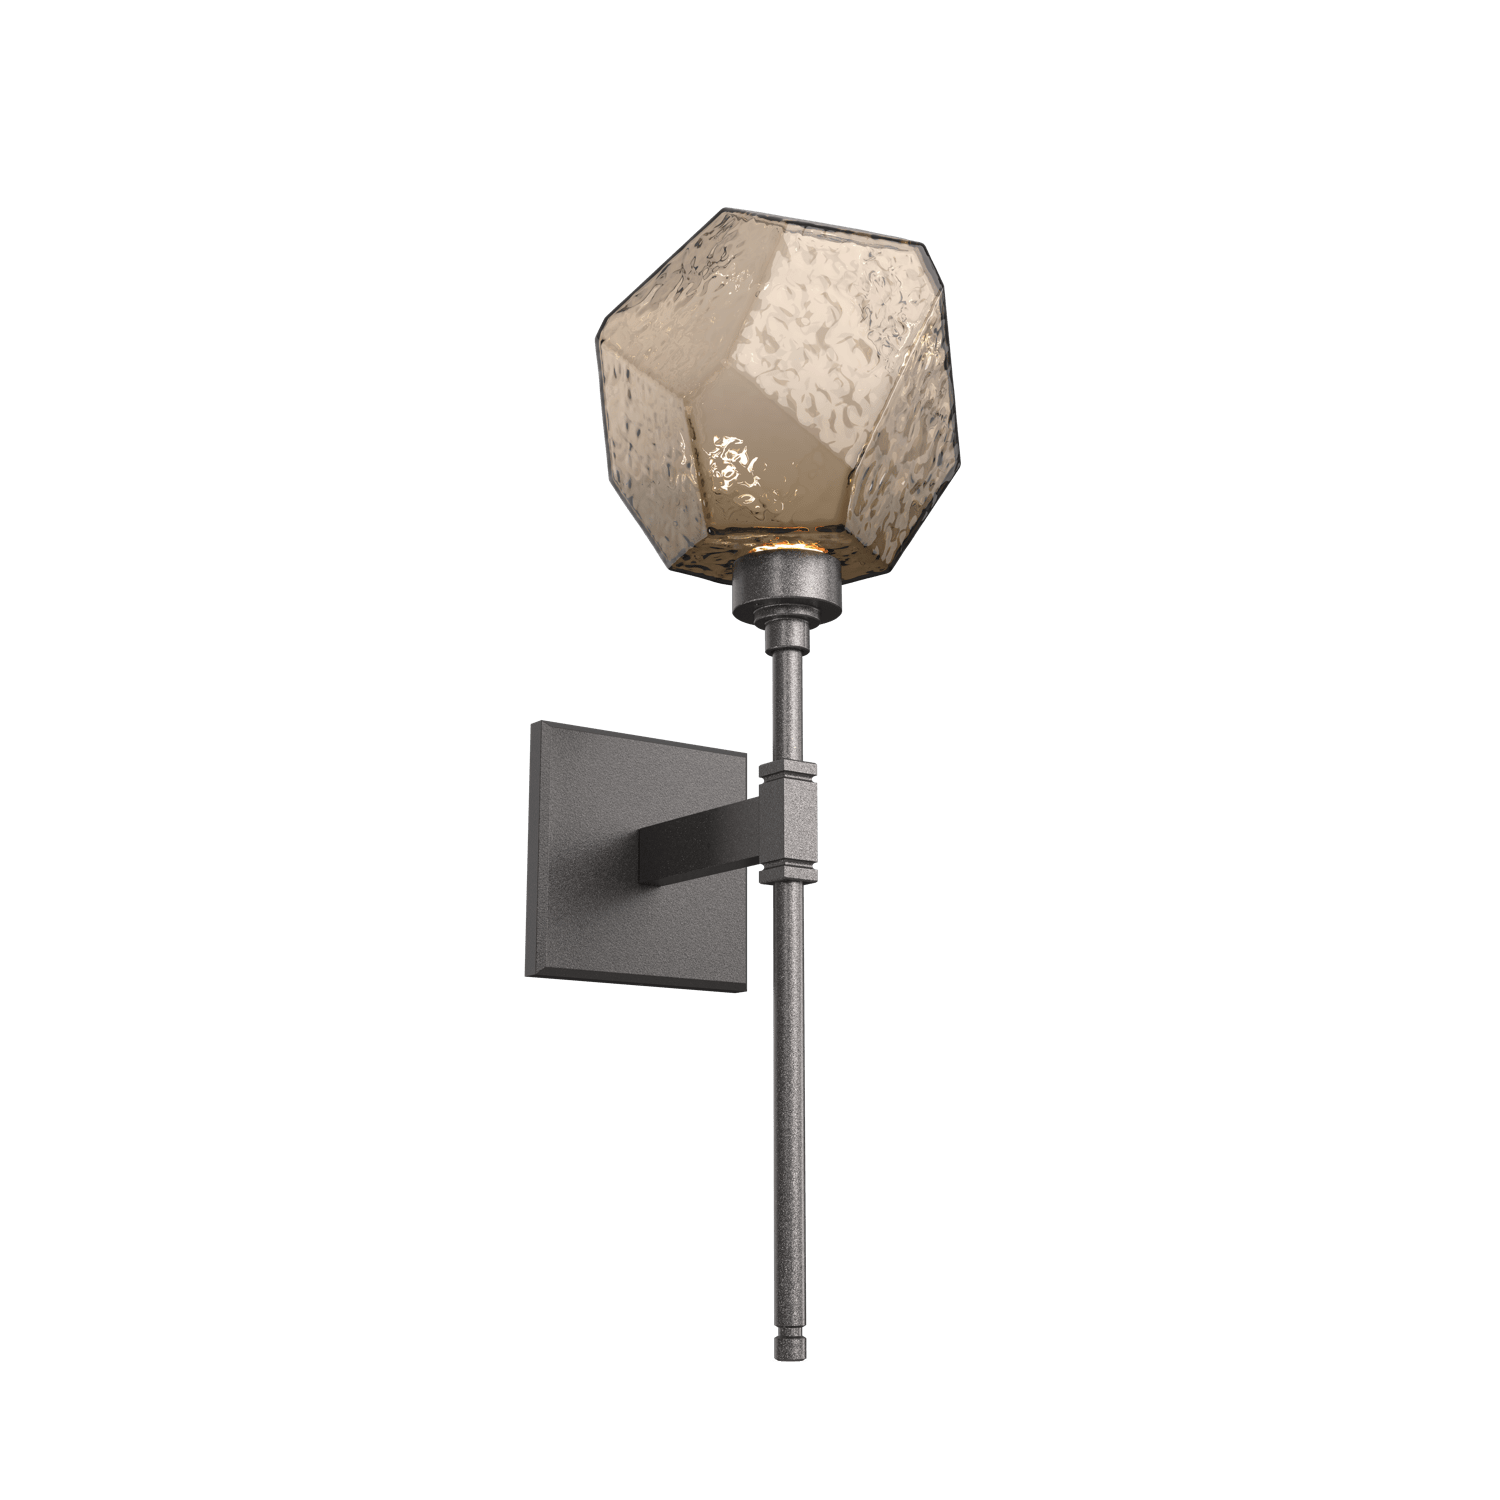 IDB0039-08-GP-B-Hammerton-Studio-Gem-belvedere-wall-sconce-with-graphite-finish-and-bronze-blown-glass-shades-and-LED-lamping